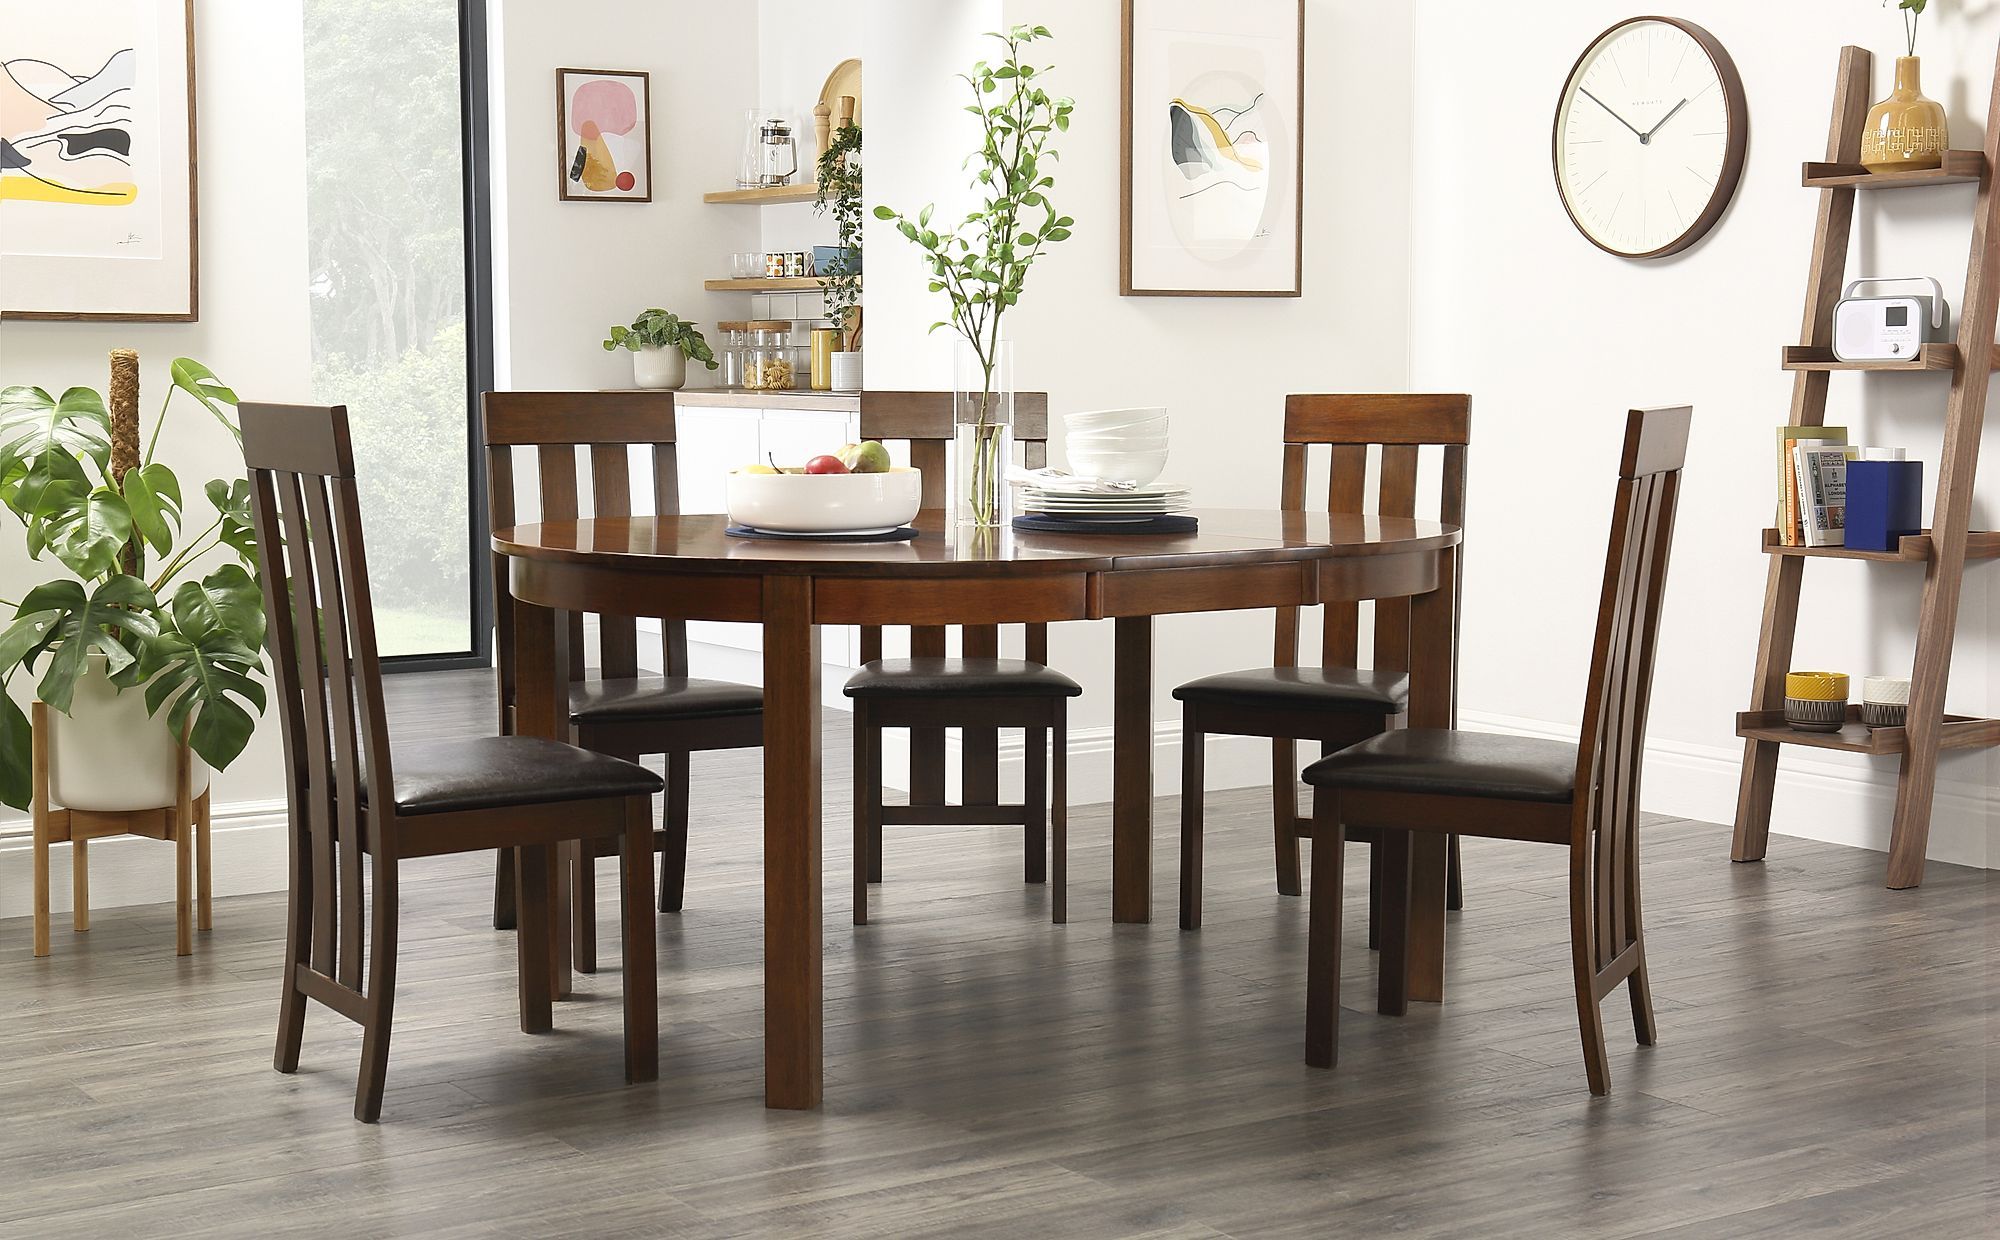 Marlborough Round Dark Wood Extending Dining Table With 6 In 2018 Dark Brown Round Dining Tables (View 10 of 15)